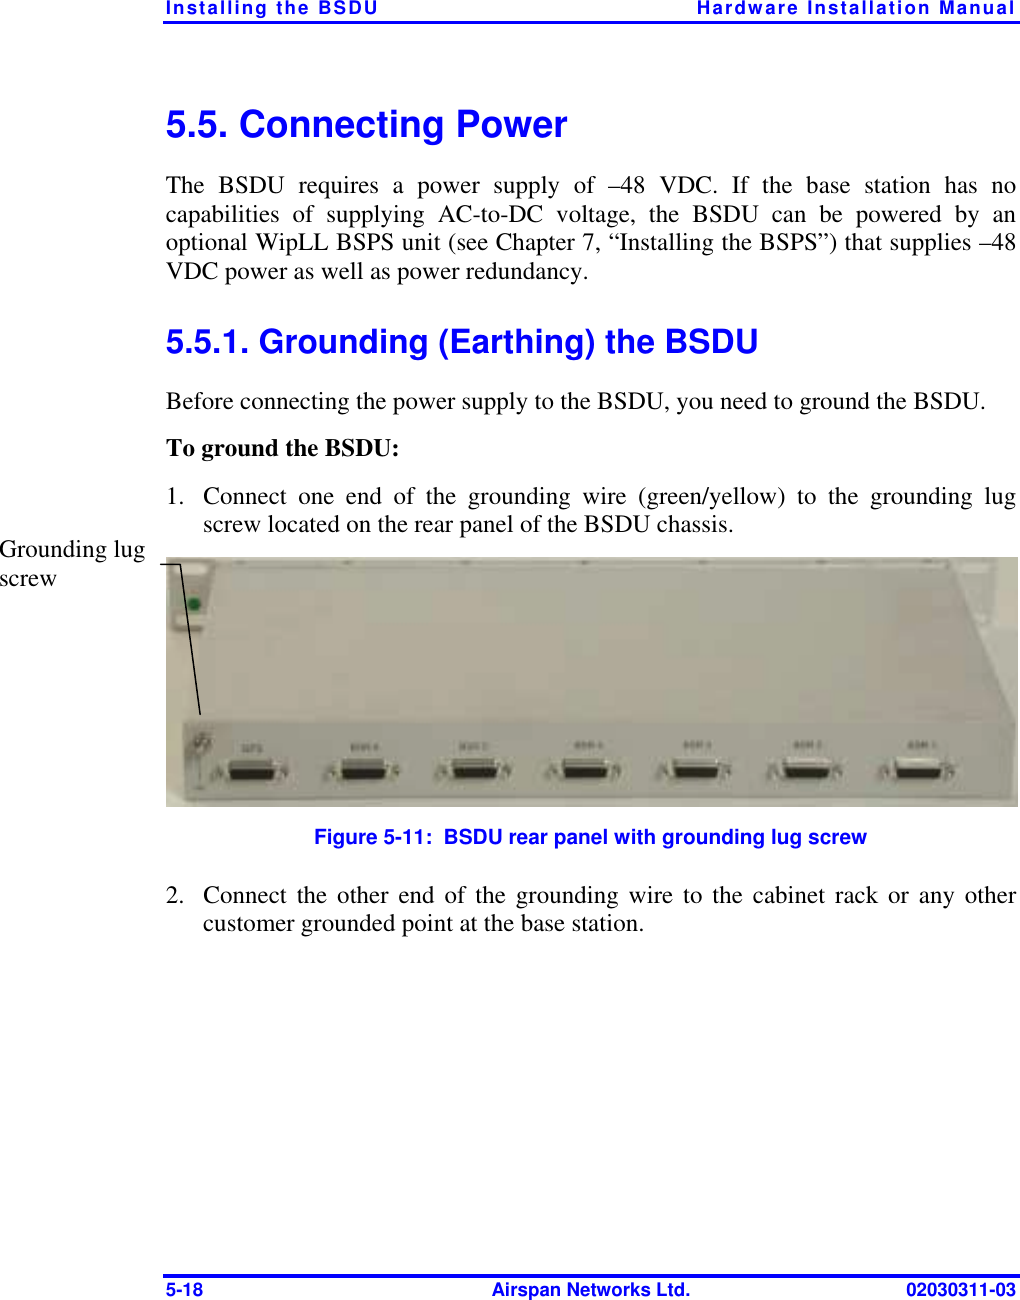 Installing the BSDU  Hardware Installation Manual 5-18  Airspan Networks Ltd.  02030311-03 5.5. Connecting Power The BSDU requires a power supply of –48 VDC. If the base station has no capabilities of supplying AC-to-DC voltage, the BSDU can be powered by an optional WipLL BSPS unit (see Chapter 7, “Installing the BSPS”) that supplies –48 VDC power as well as power redundancy.  5.5.1. Grounding (Earthing) the BSDU Before connecting the power supply to the BSDU, you need to ground the BSDU. To ground the BSDU: 1.  Connect one end of the grounding wire (green/yellow) to the grounding lug screw located on the rear panel of the BSDU chassis.  Figure  5-11:  BSDU rear panel with grounding lug screw 2.  Connect the other end of the grounding wire to the cabinet rack or any other customer grounded point at the base station. Grounding lug screw 